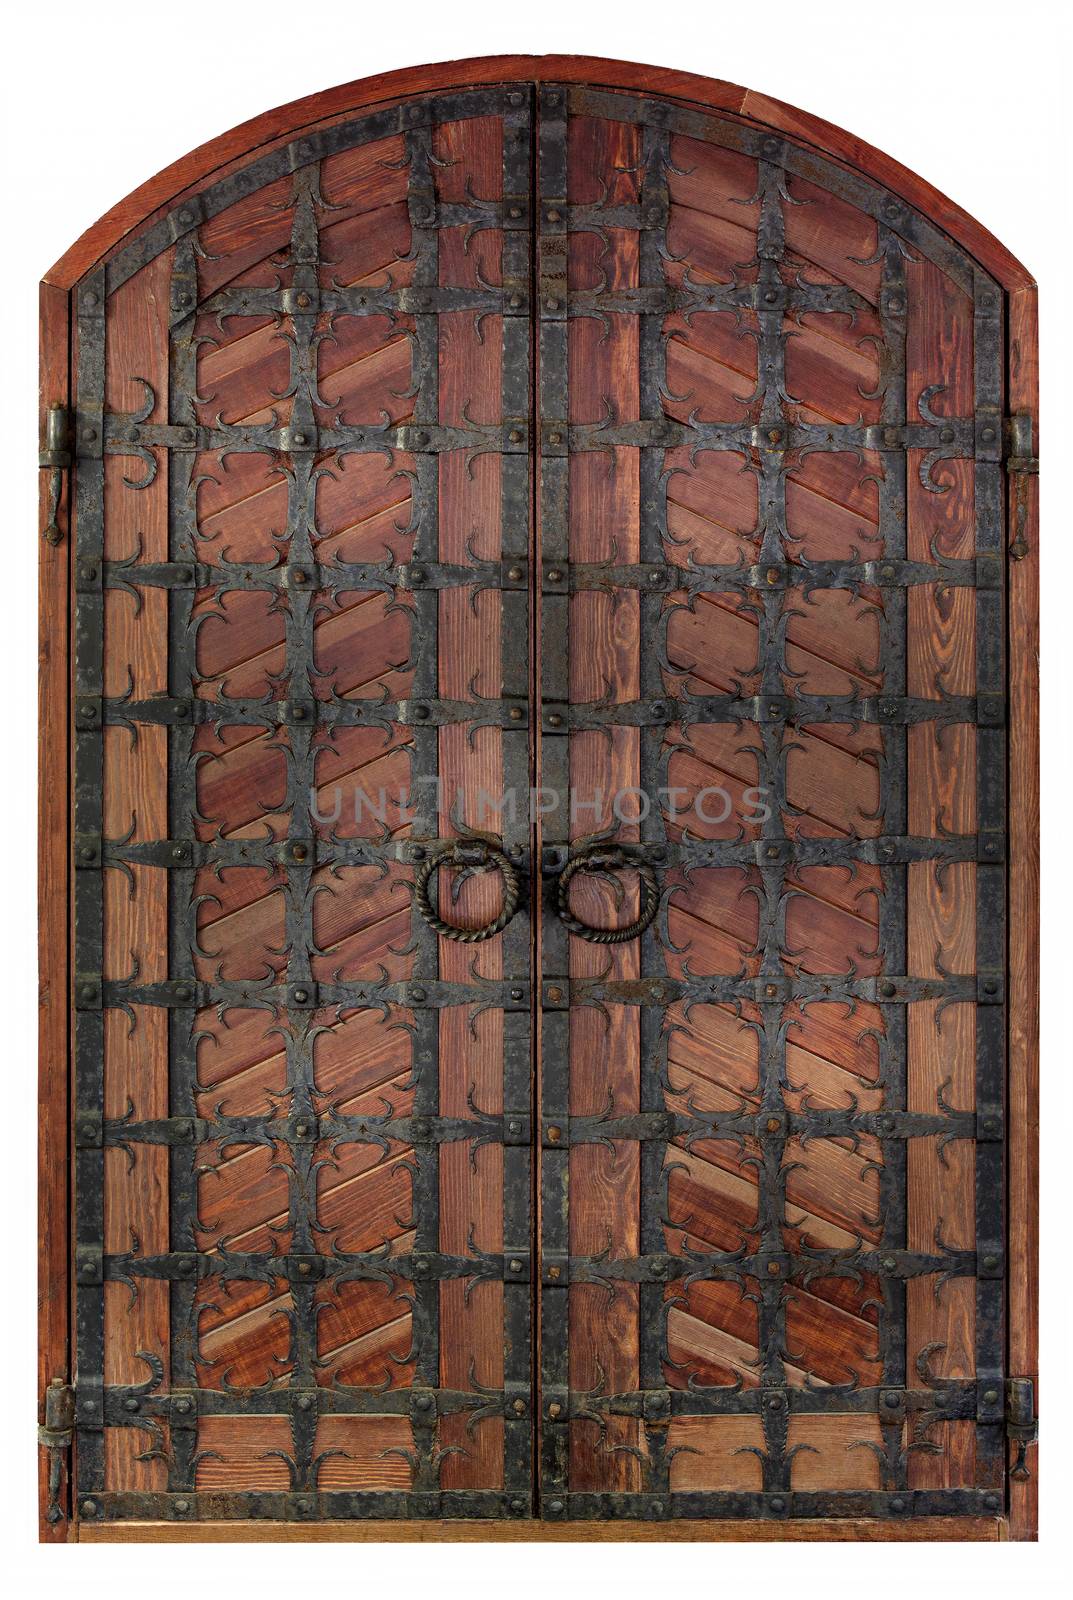 Antique wooden antique wooden doors with a forged iron grille and cross bars isolated on a white background.